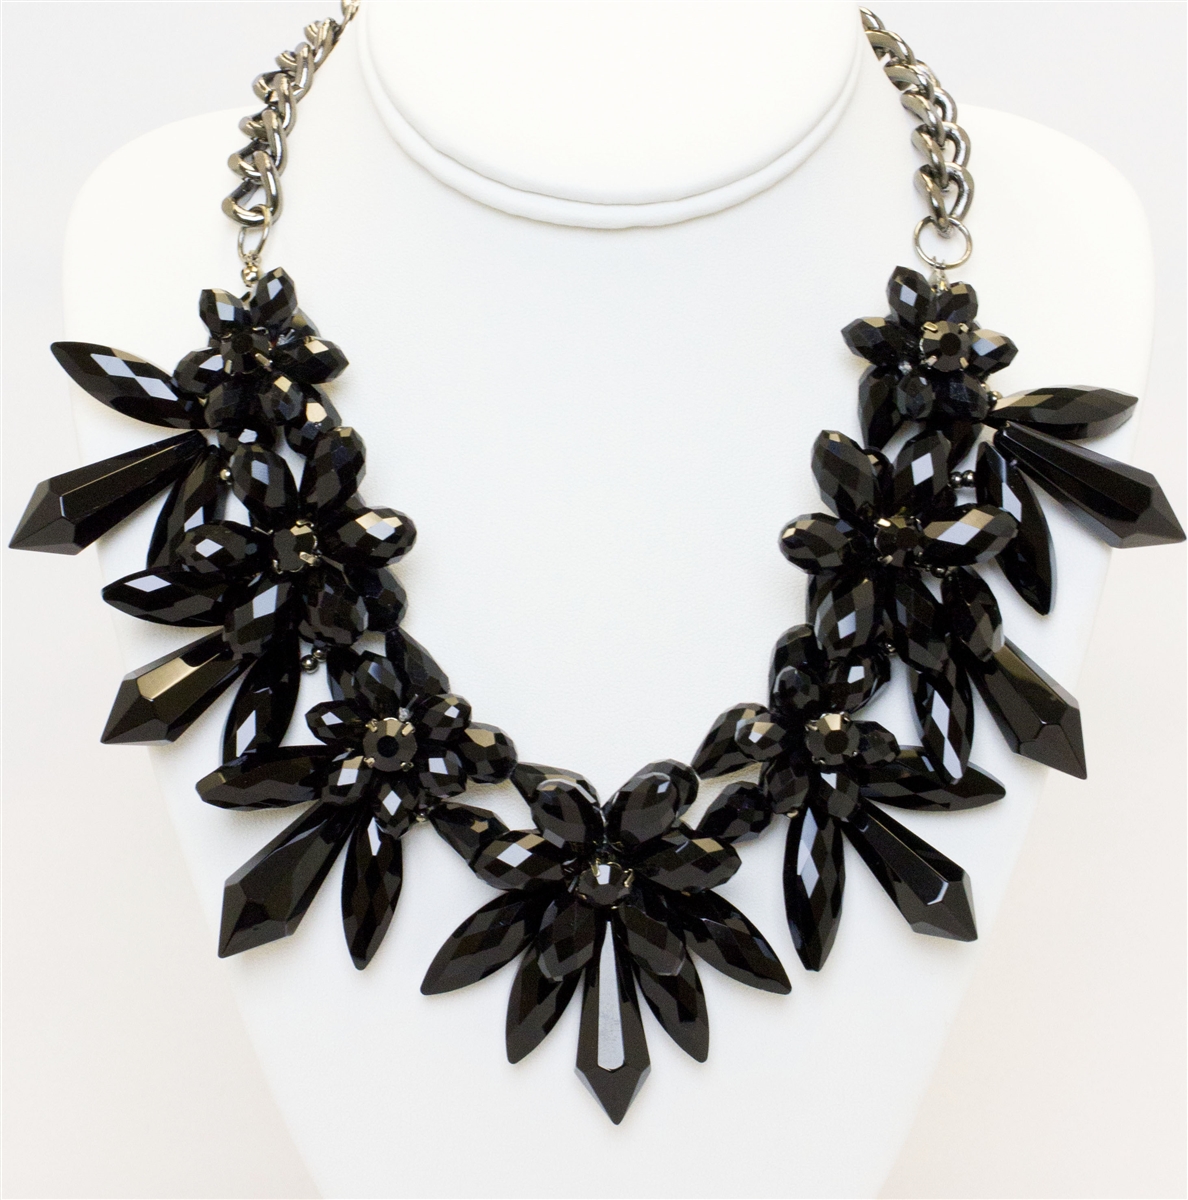 Womens Gold Tone Resin Black Beaded Statement Necklace | eBay